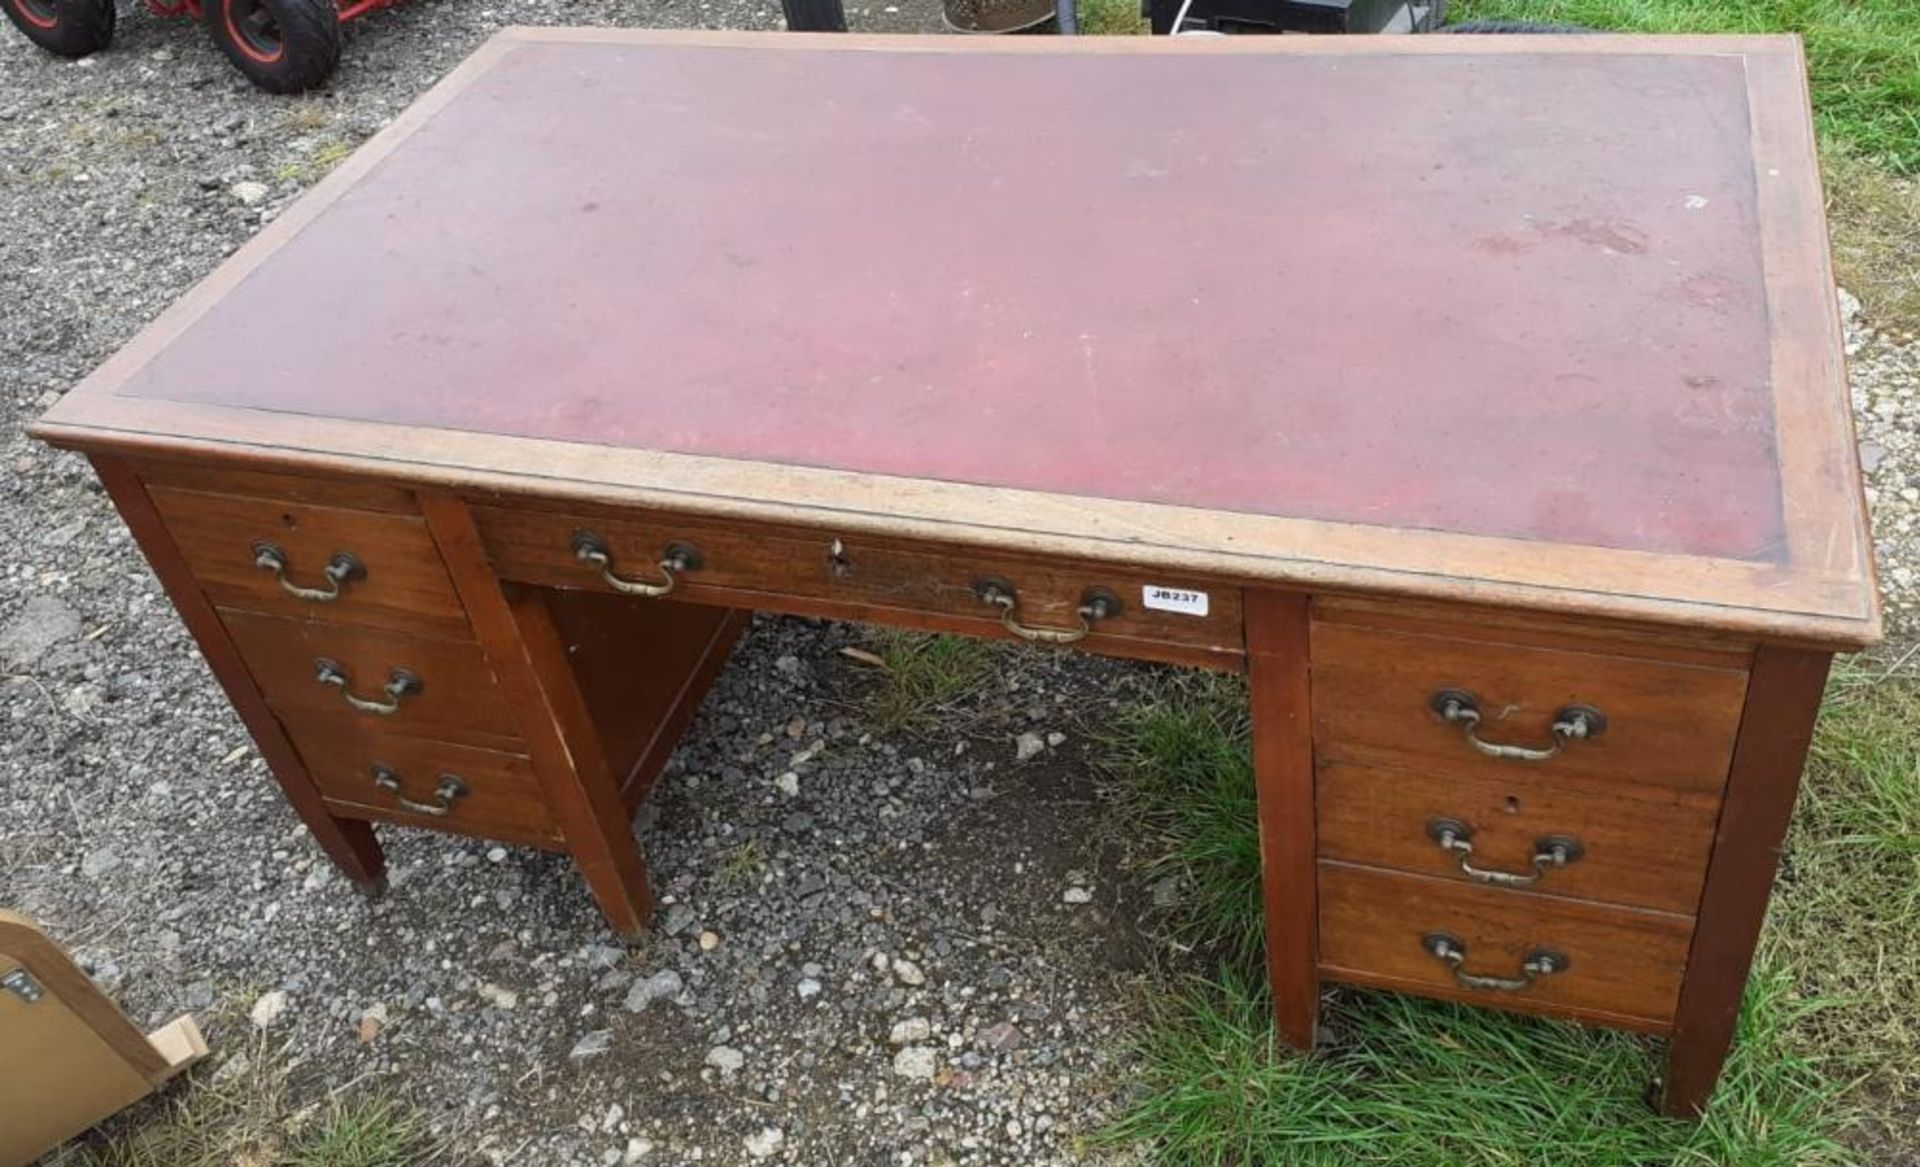 1 x Large Original Writing Desk With Leather Top Pad And Deep Drawers With Original Castors Under